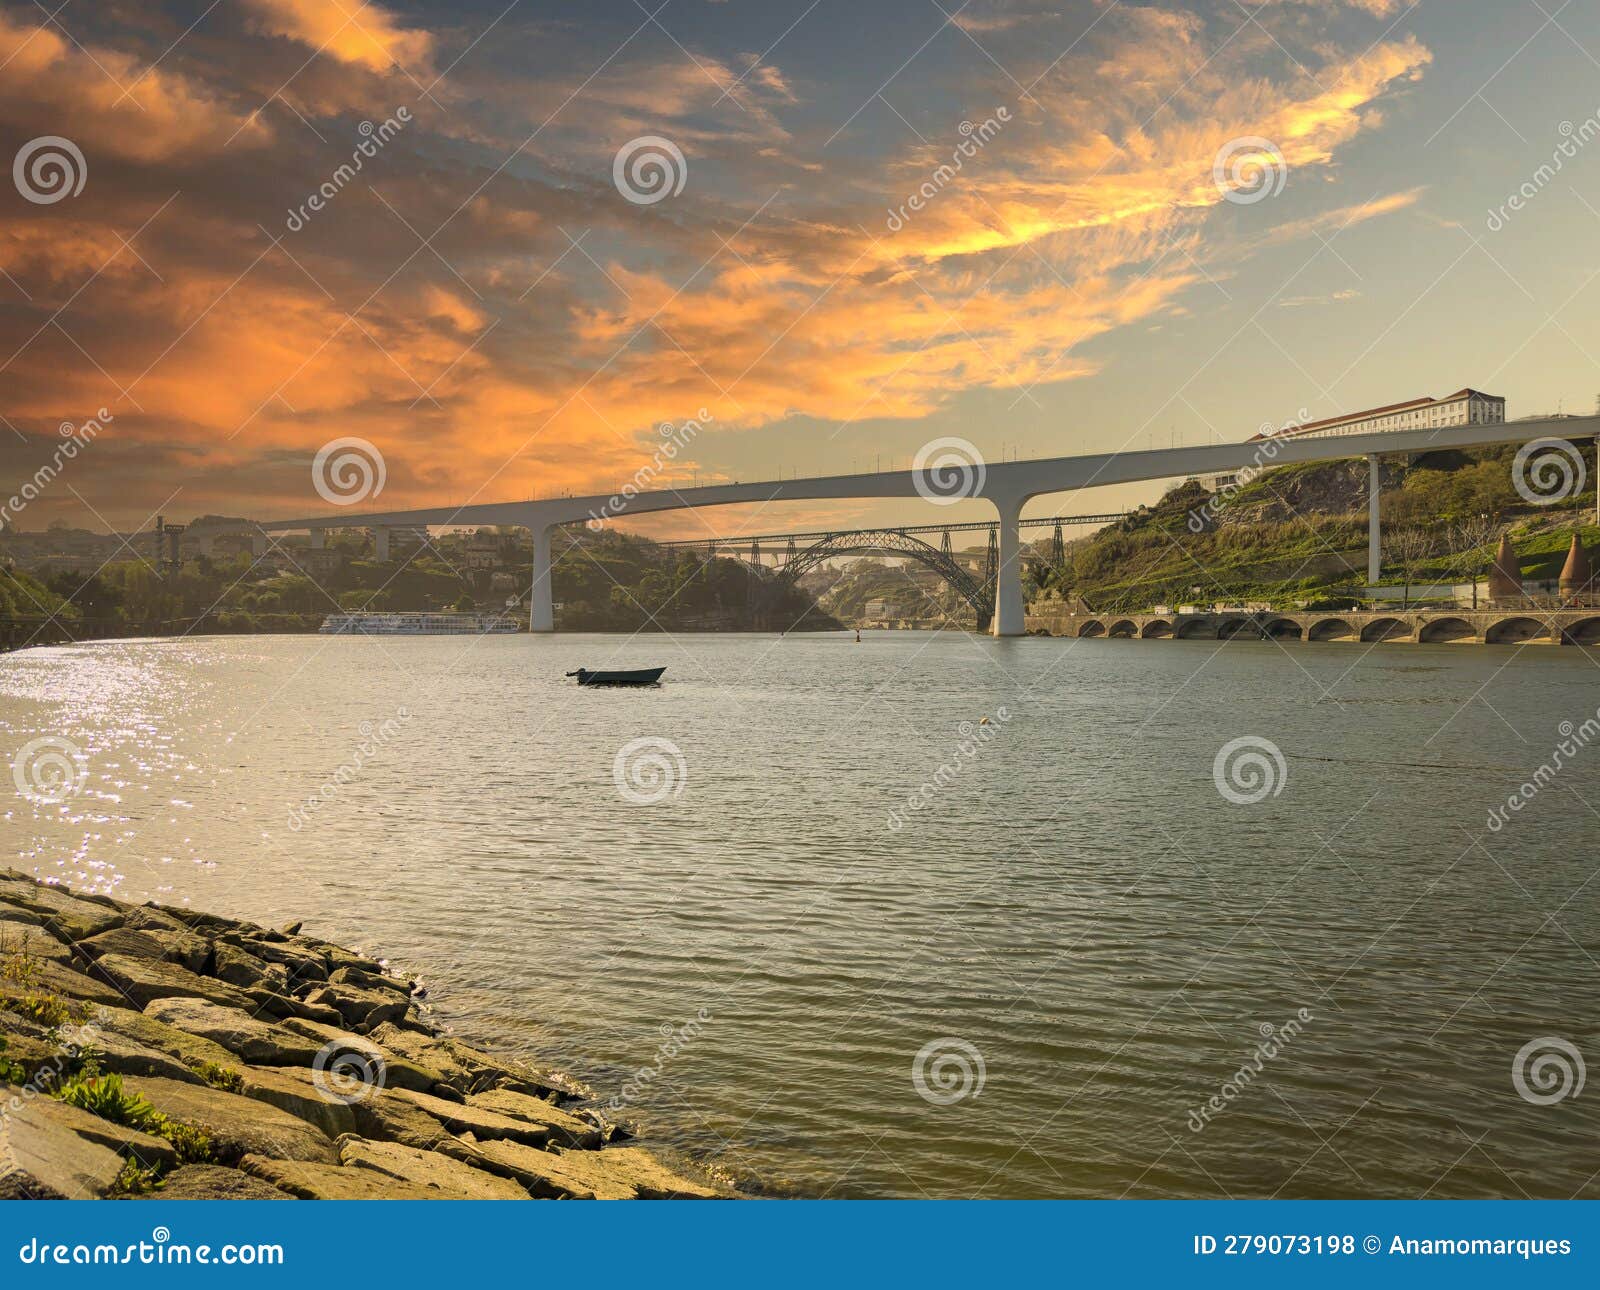 river beach of areinho on the bank of gaia on the douro river at sunset. portugal